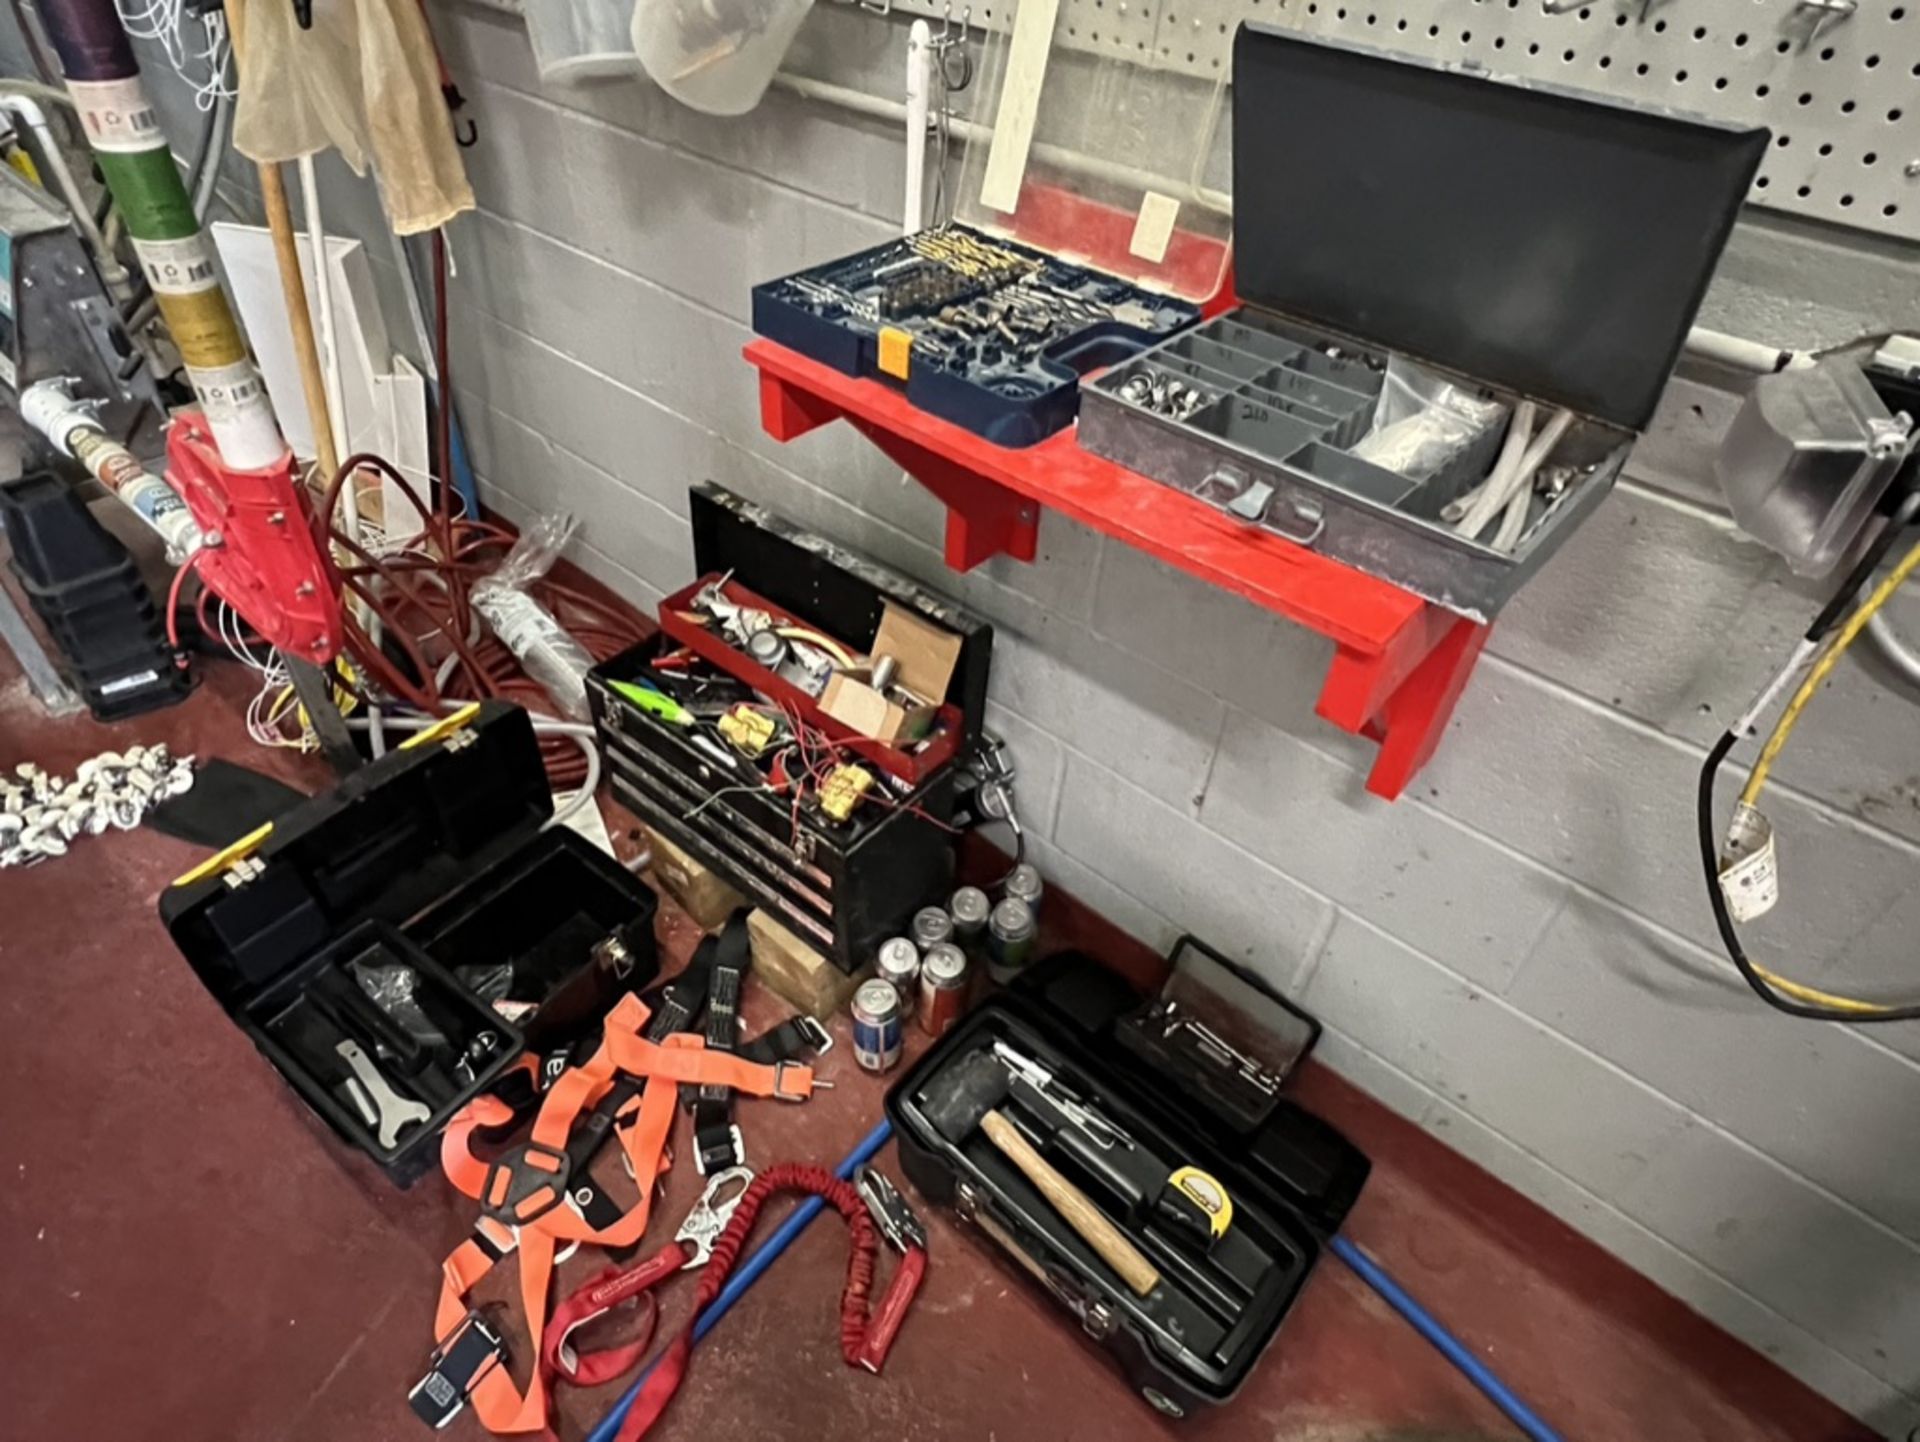 LOT OF: (2) PLASTIC TOOL BOXES, (1) METAL CRAFTSMAN TOOL BOX AND PICTURED SMALL TOOLS, DRILL BITS,